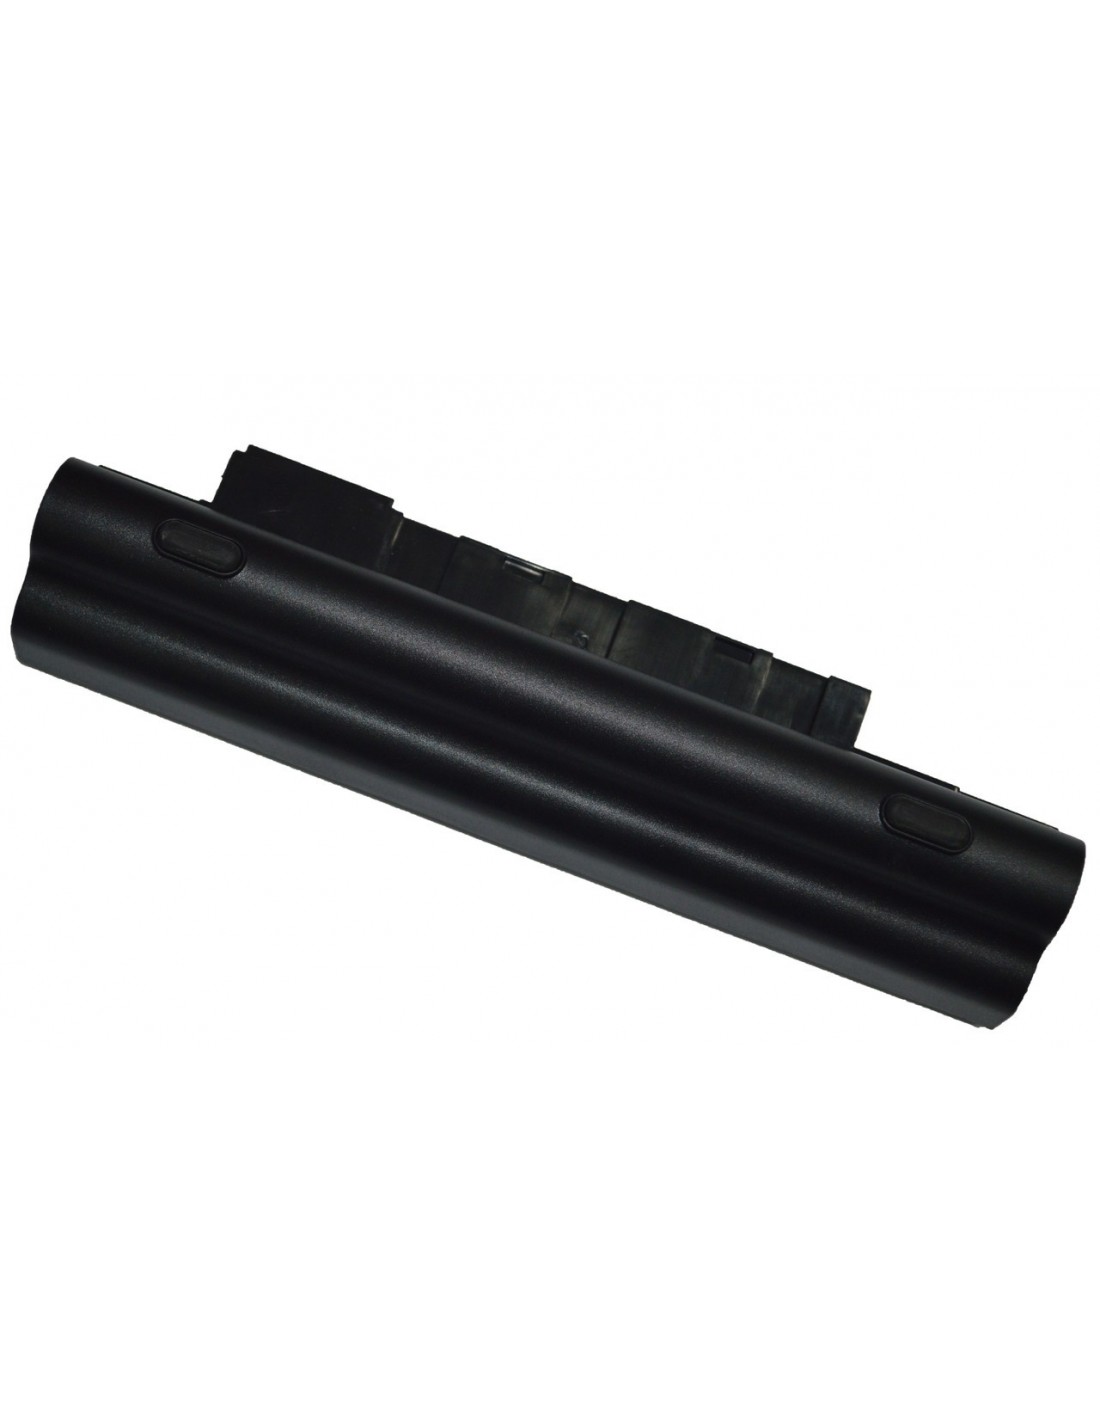 SellZone Laptop Battery Replacement Fully Compatible for for Aspire One 722 AO722 D257 D270 D257E AL10A31 AL10G31 AL10B31